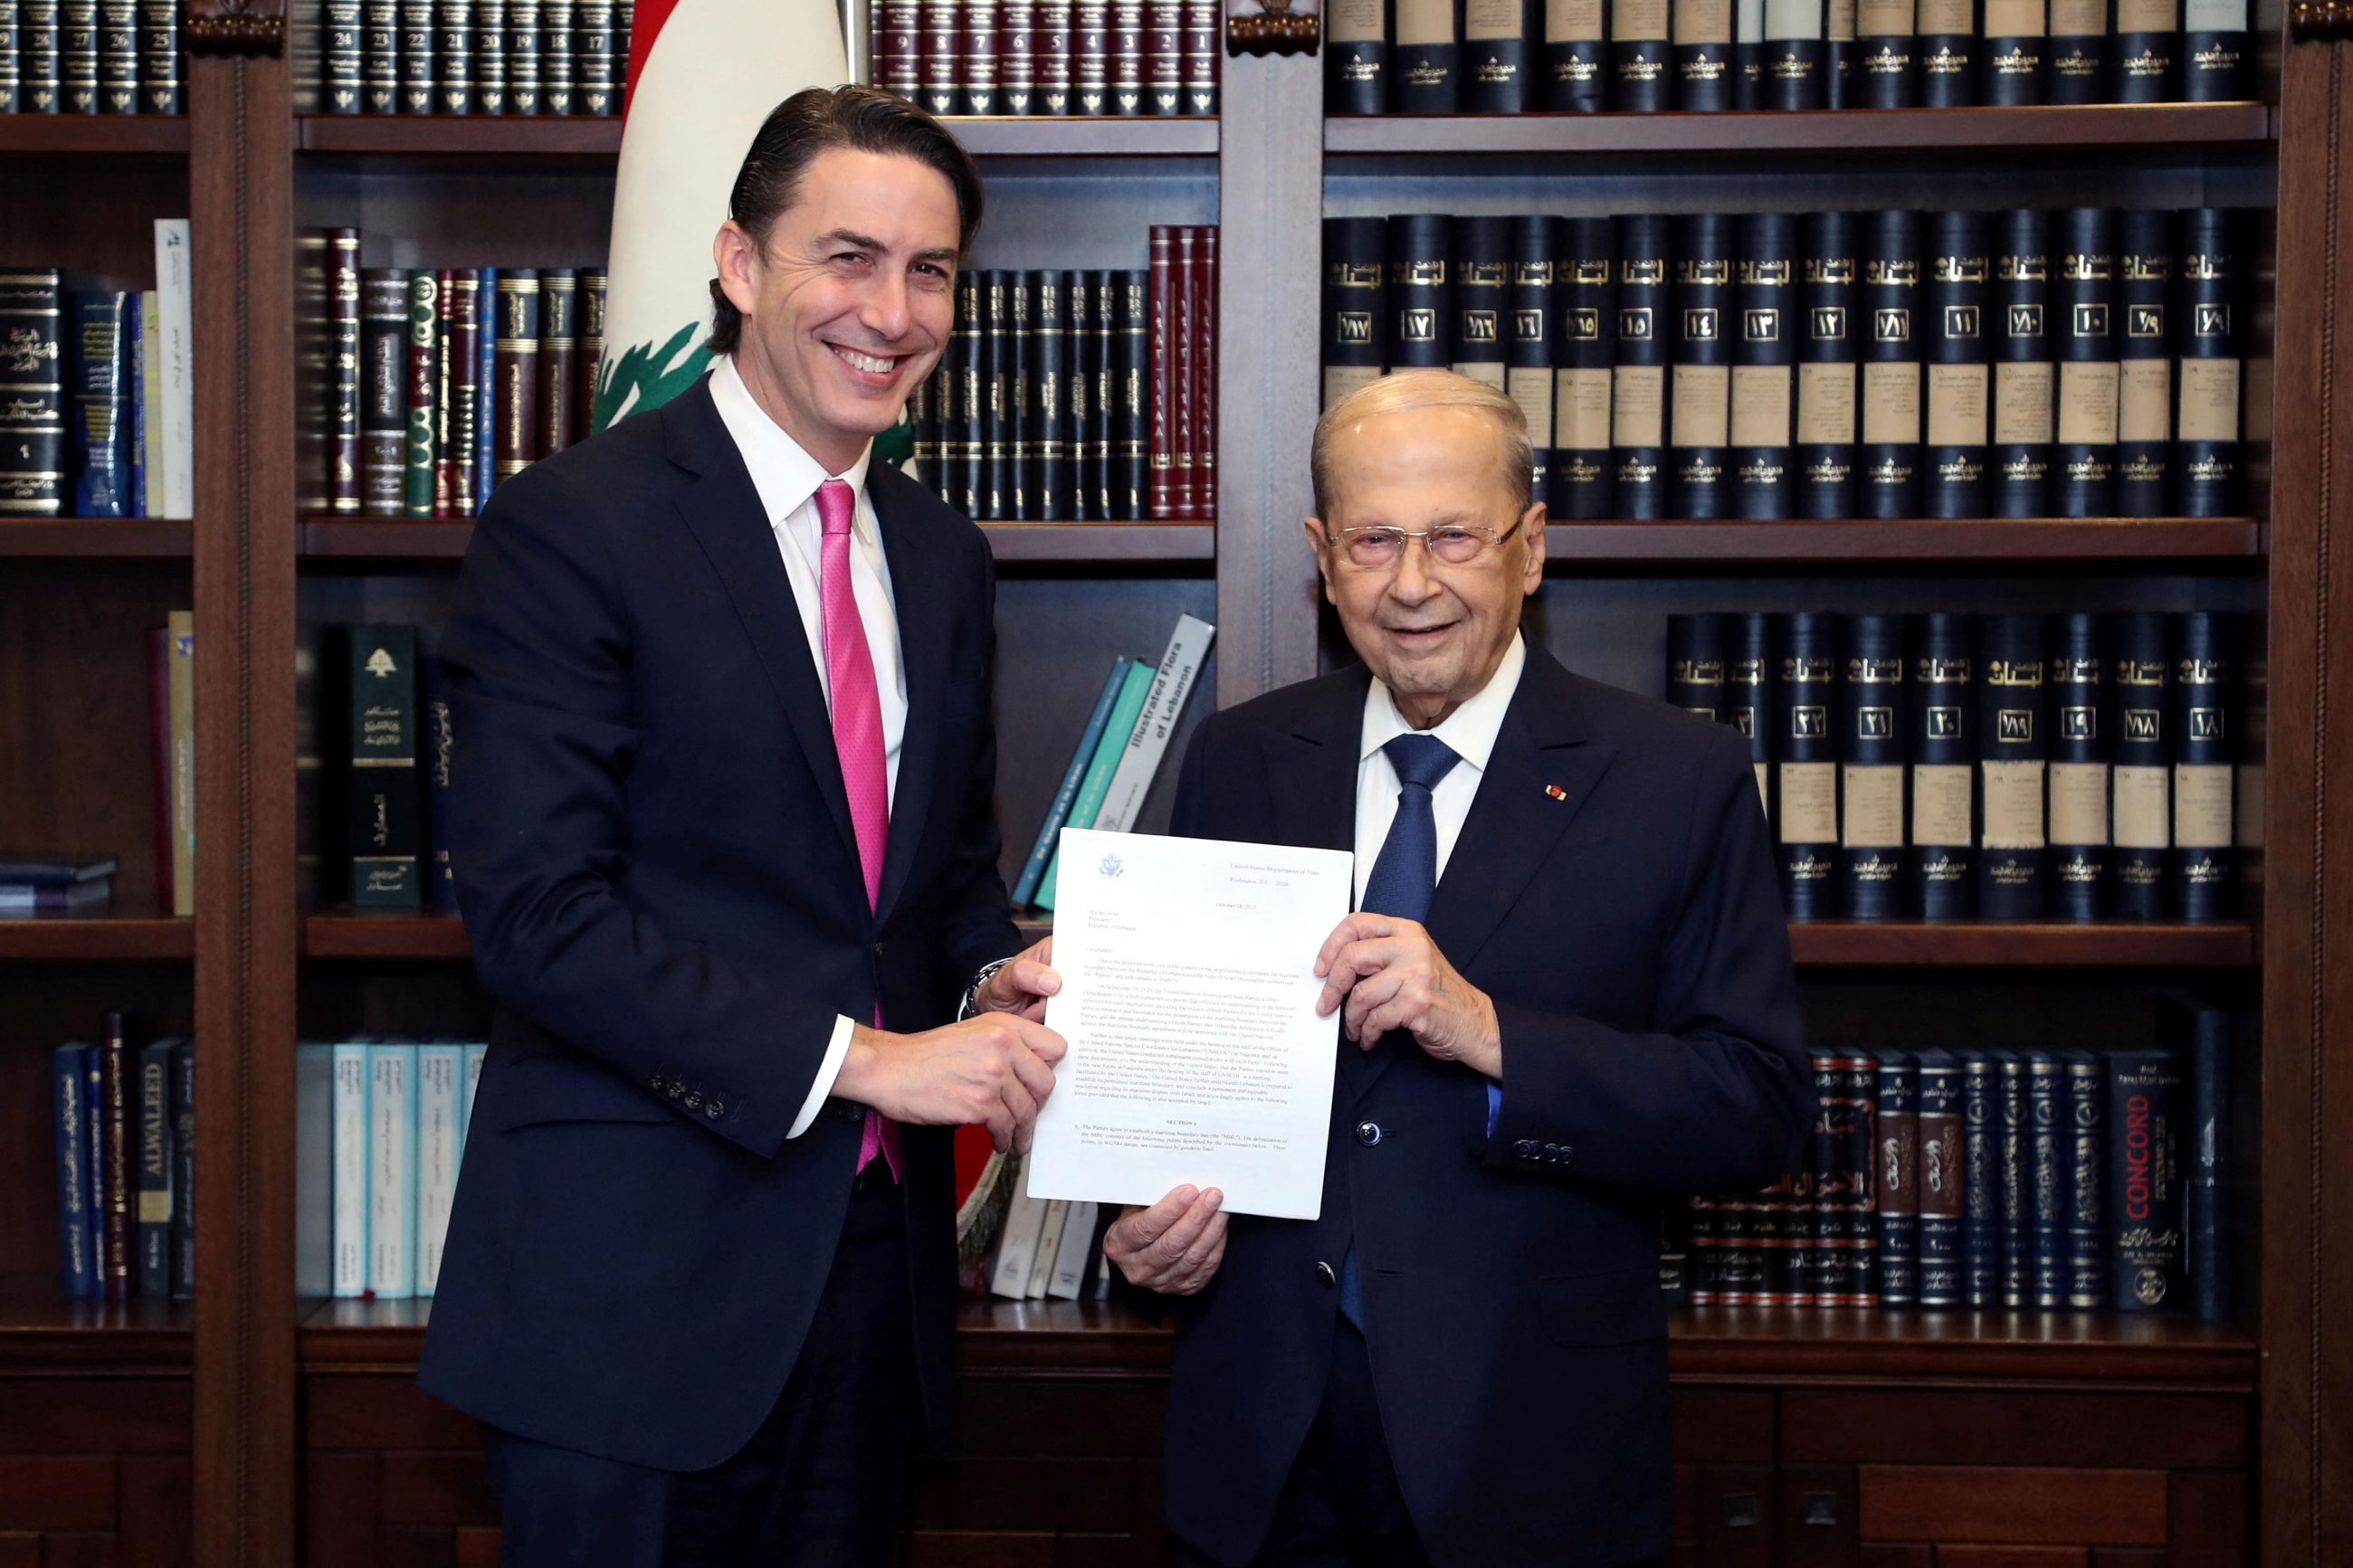 US mediatorAmos Hochstein and Lebanon's President Michel Aoun pose for a picture as they hold a letter at the presidential palace in Baabda, Lebanon 27 October 2022 (Reuters)